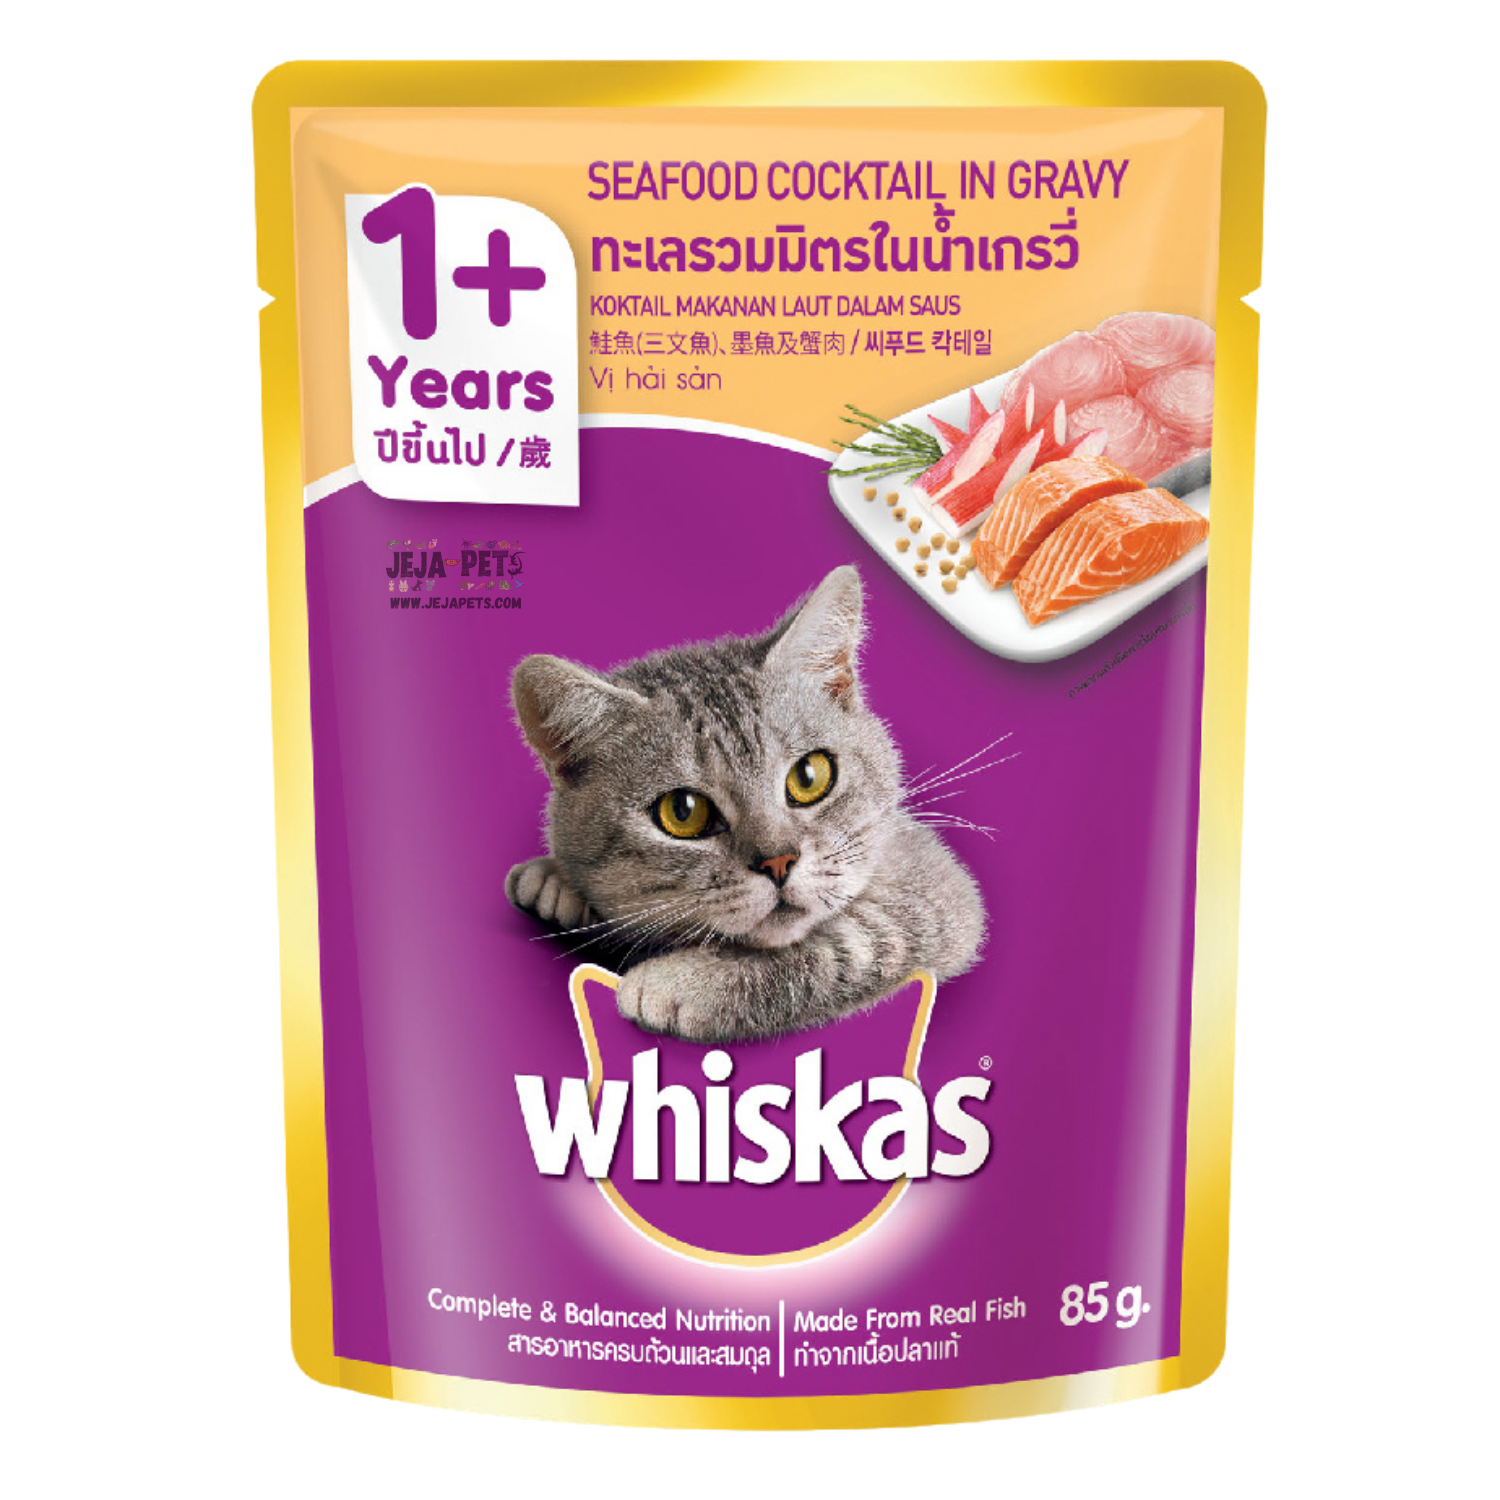 [DISCONTINUED] Whiskas Pouch Seafood Cocktail Cat Wet Food - 80g